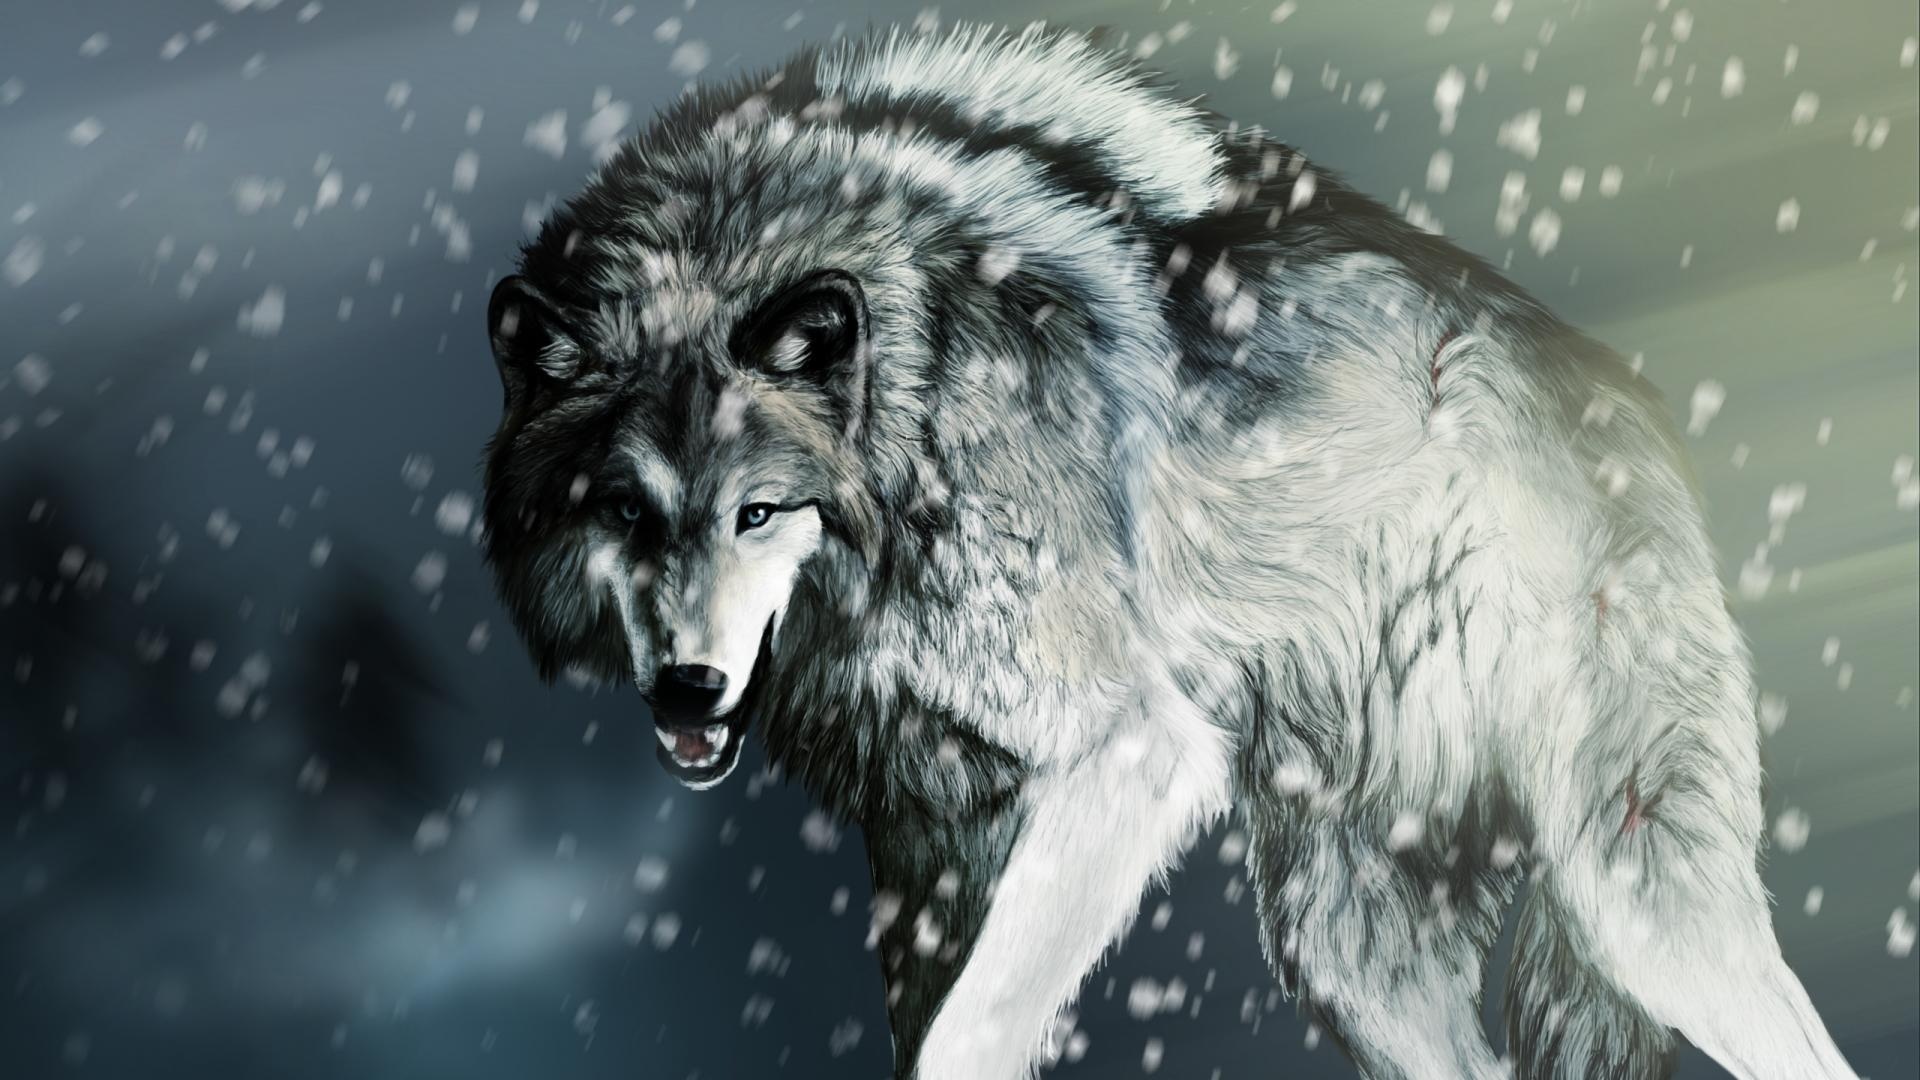 Ice Wolf, Dire wolf wallpapers, Mythical creatures, Animal kingdom, 1920x1080 Full HD Desktop